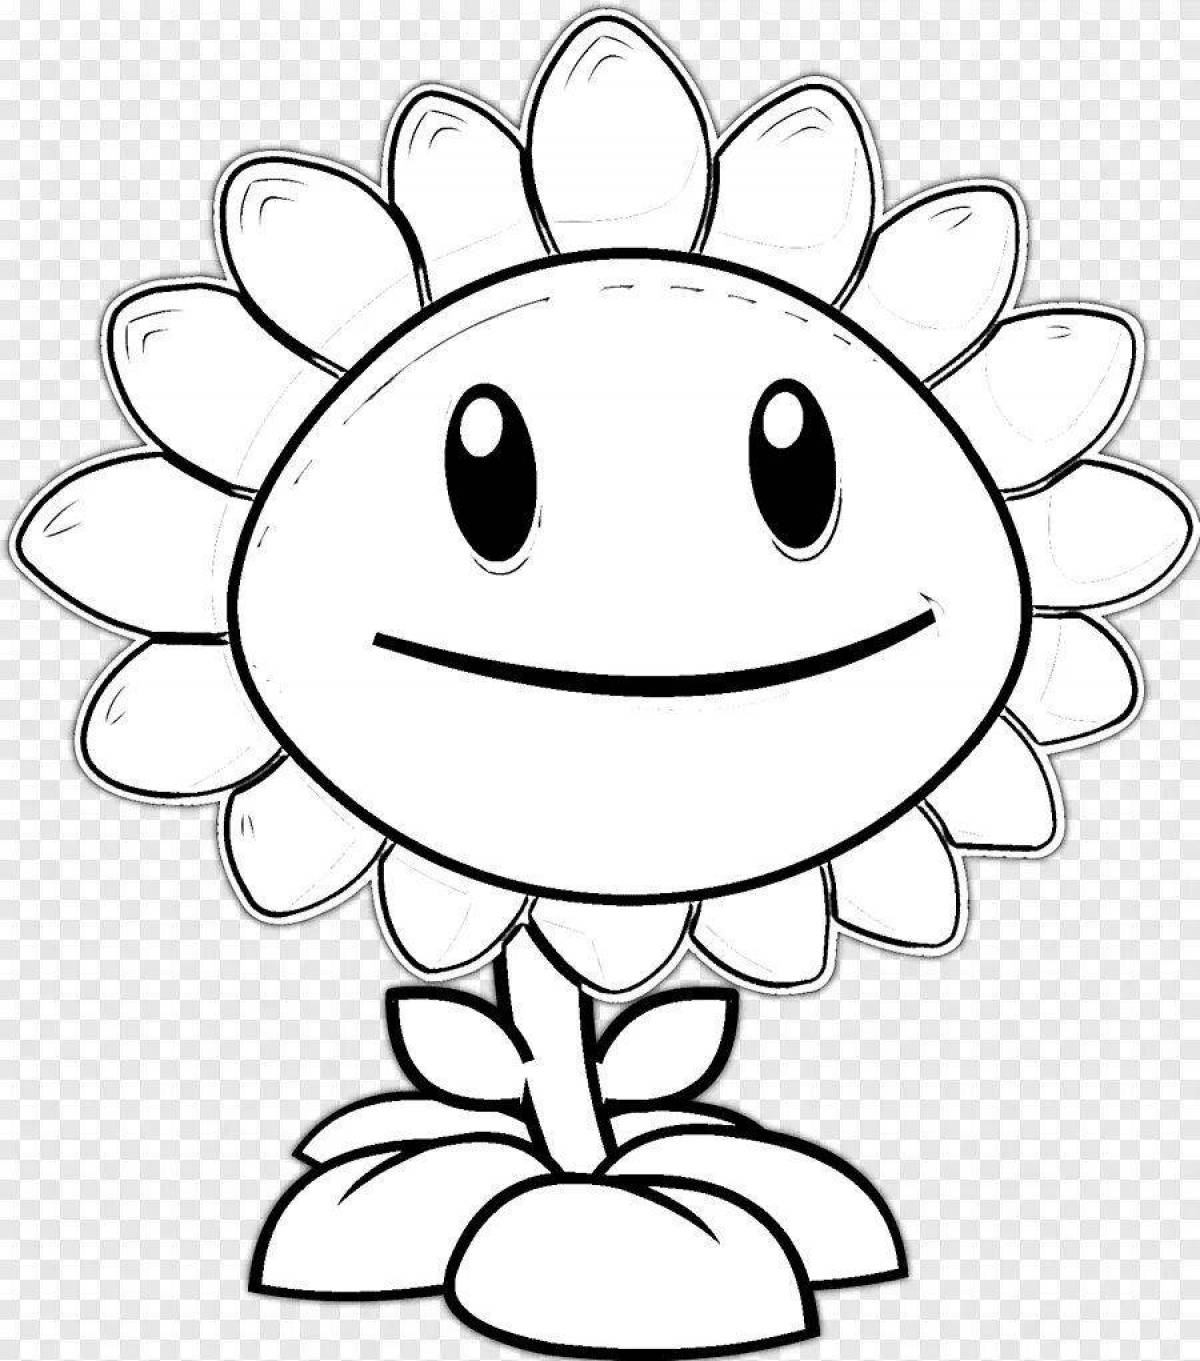 Playful coloring plants vs zombies all plants